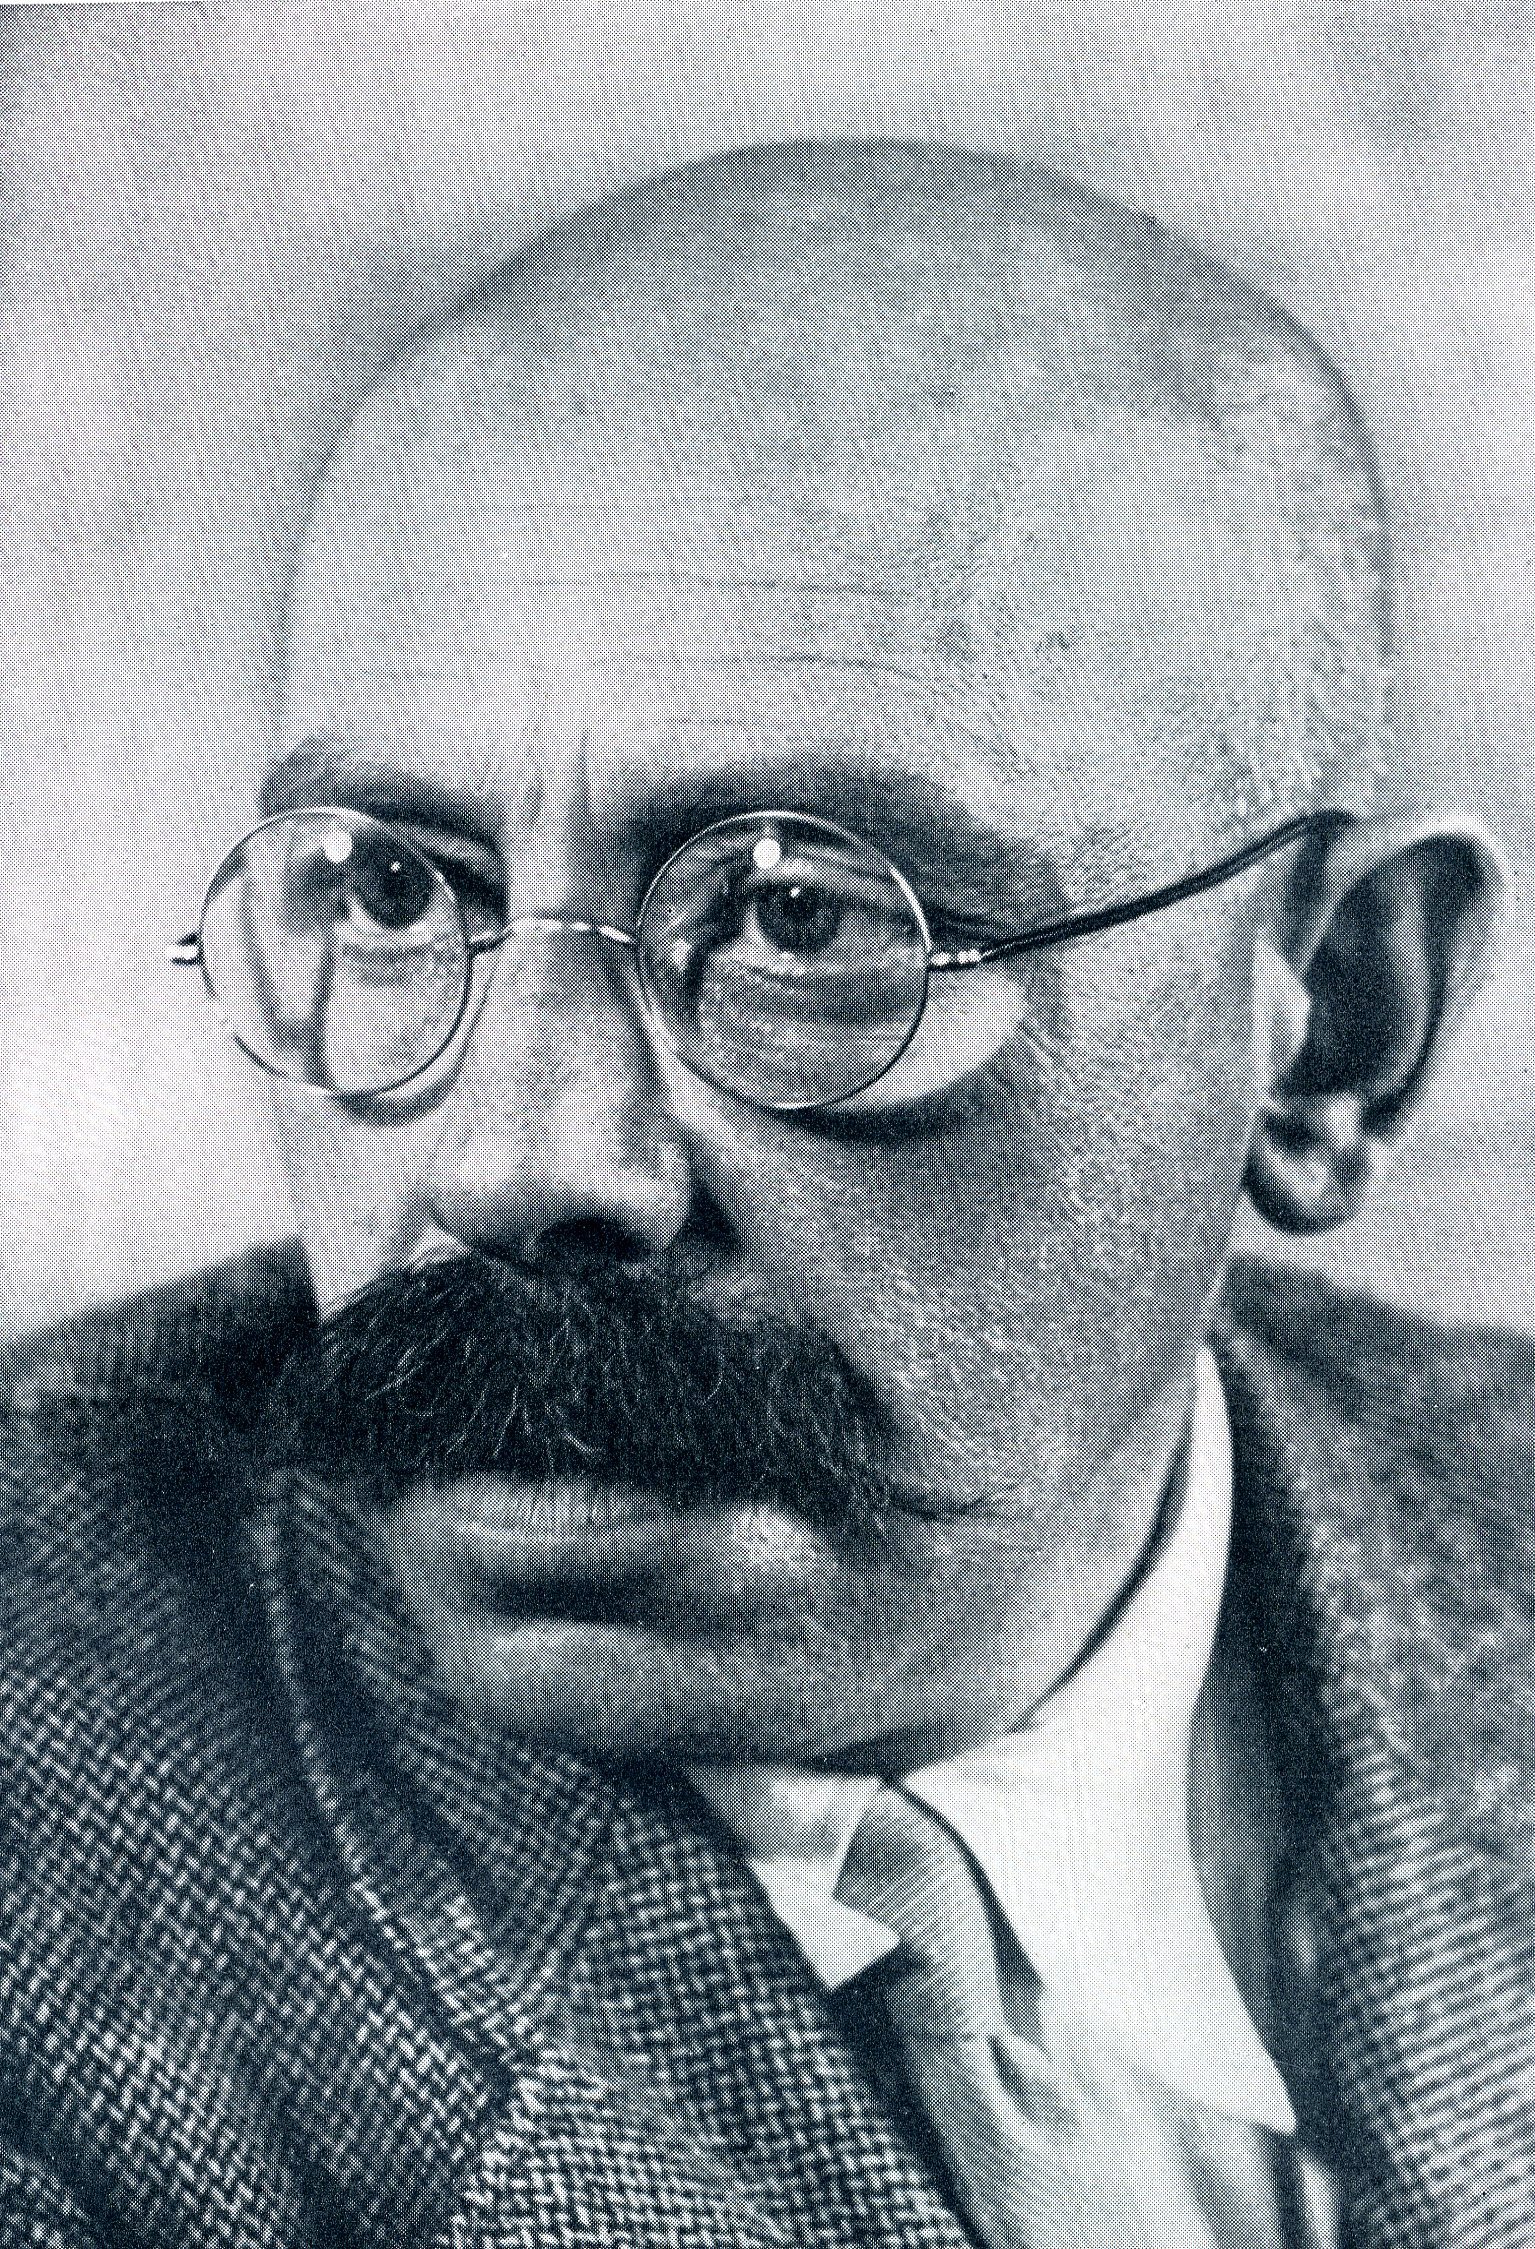 Prof. Rudolf Samoilowitsch (1881 – 1939) (Zeppelin Museum CC BY-NC-SA)